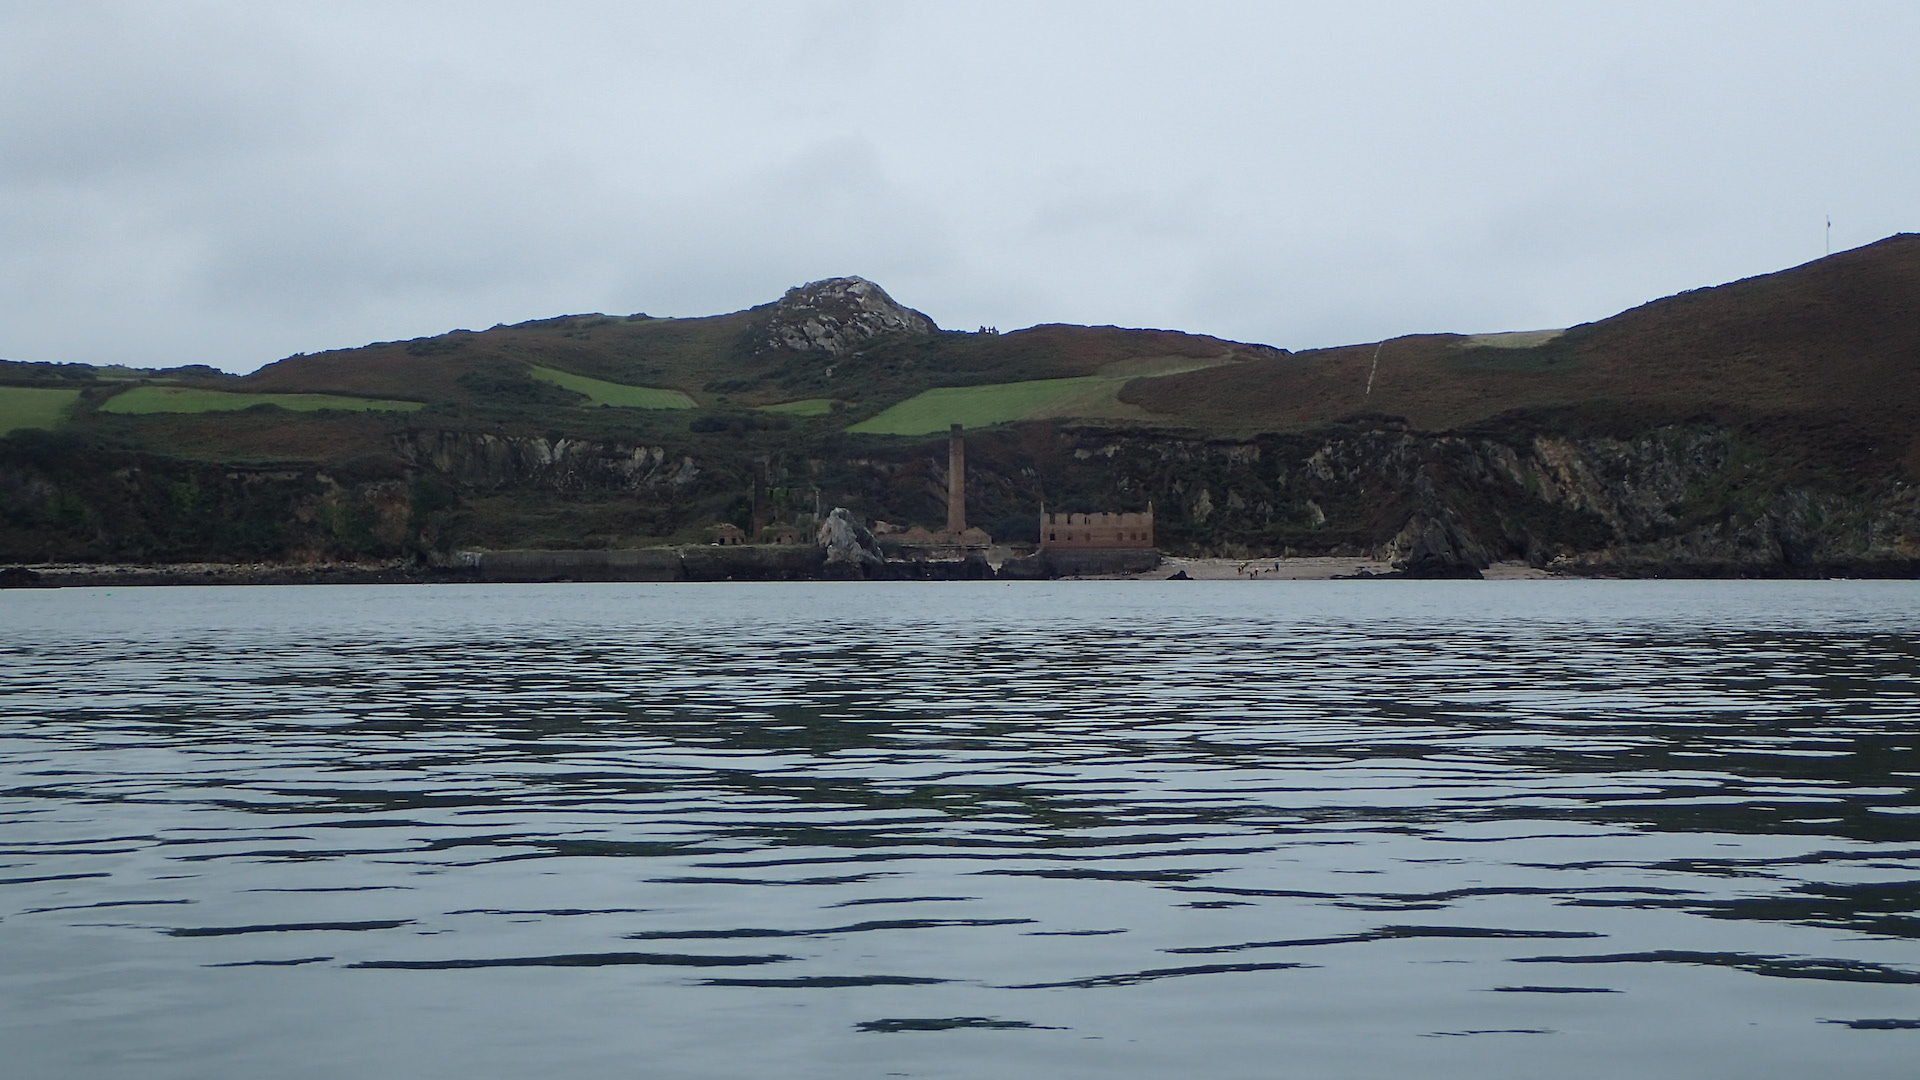 Cemlyn Bay to Point Lynas and a little beyond